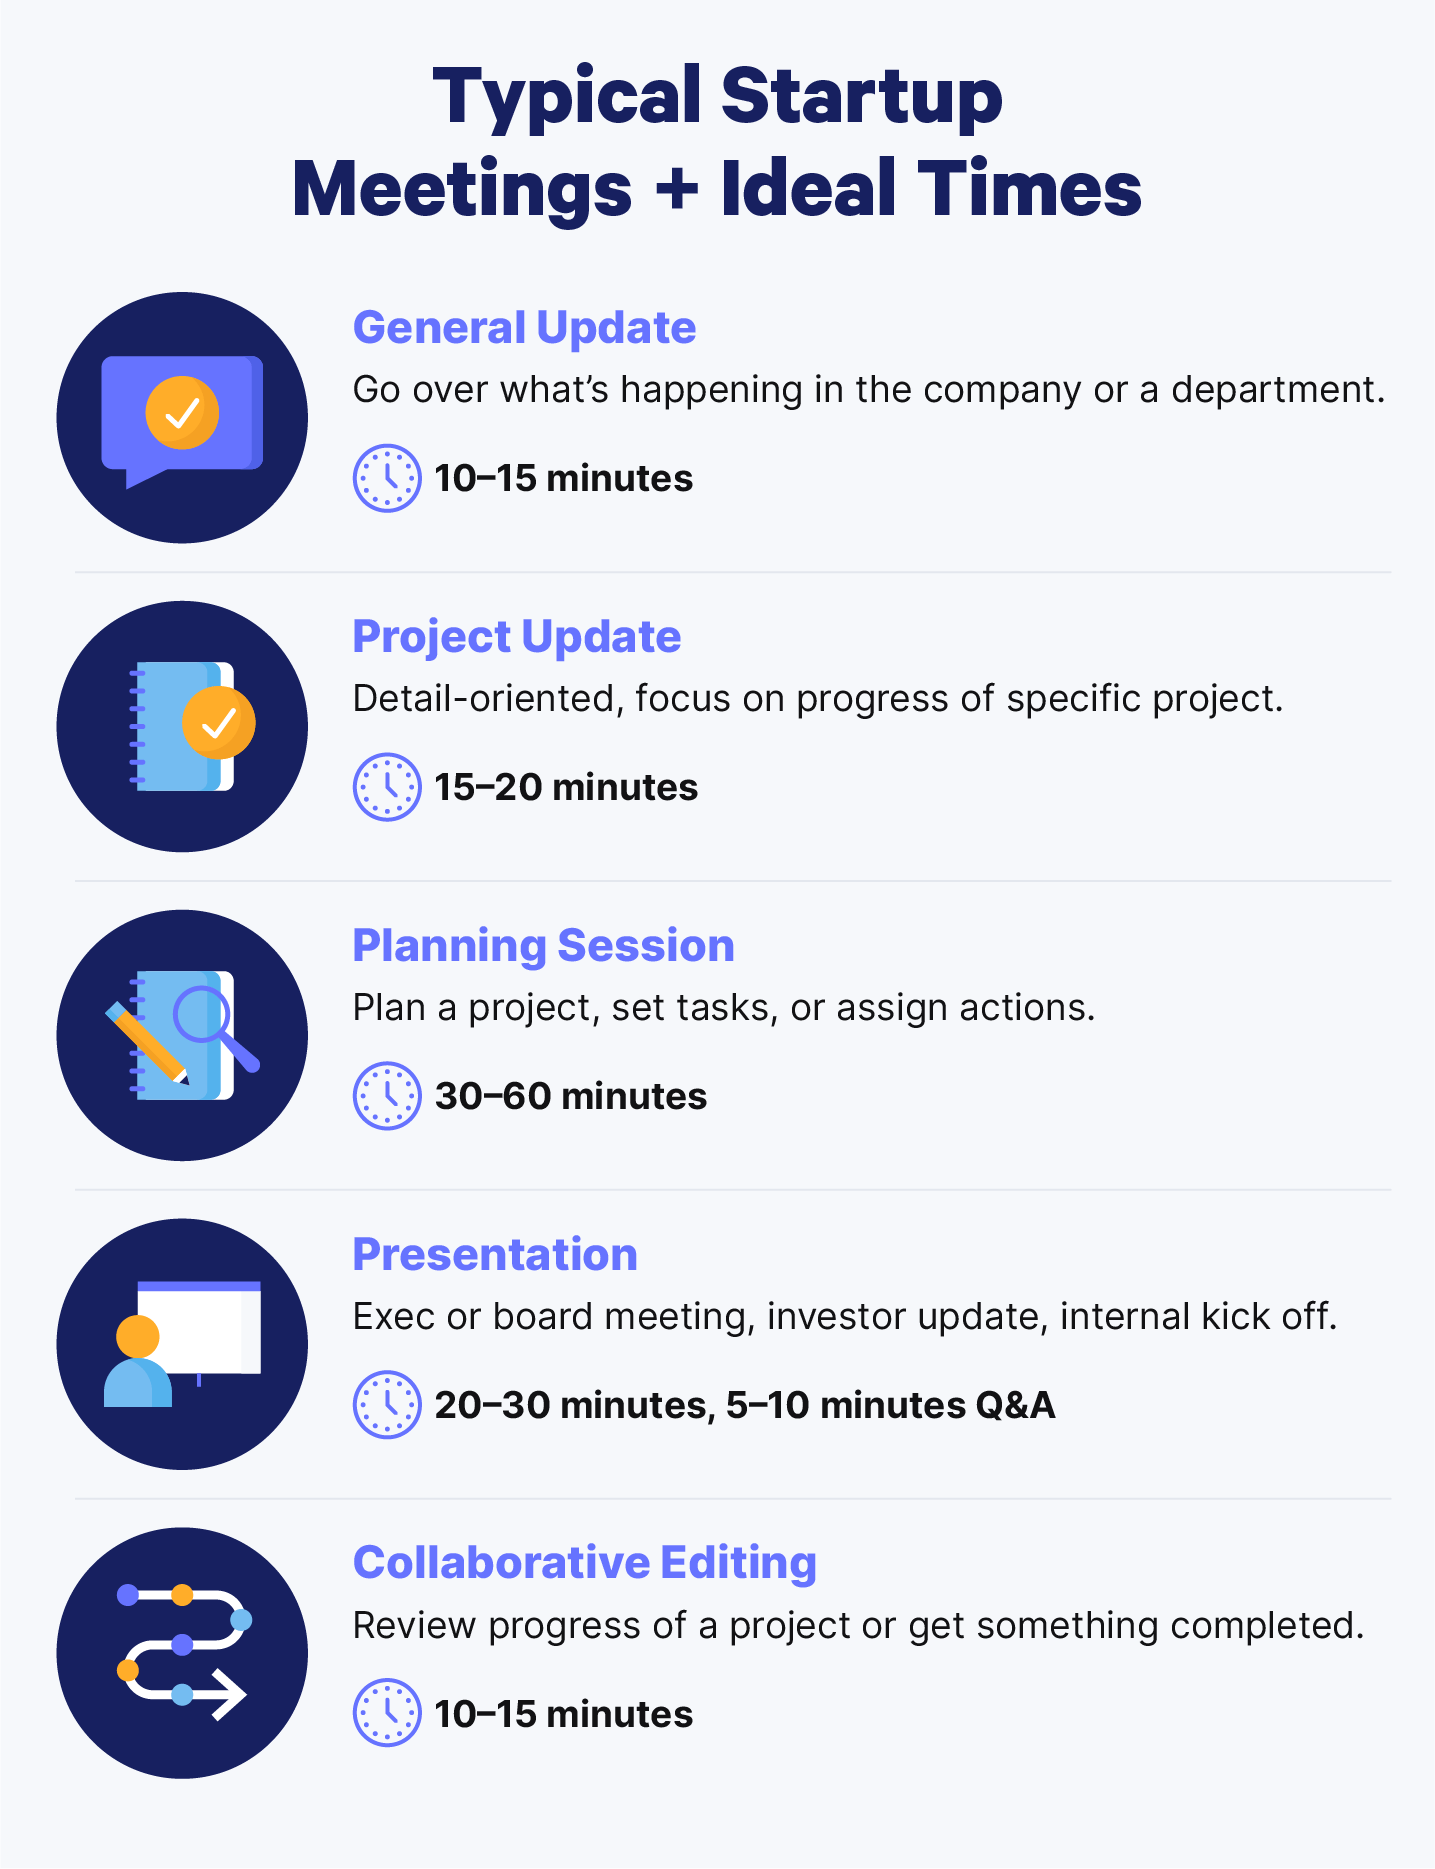 Infographic displaying typical startup meetings and ideal times